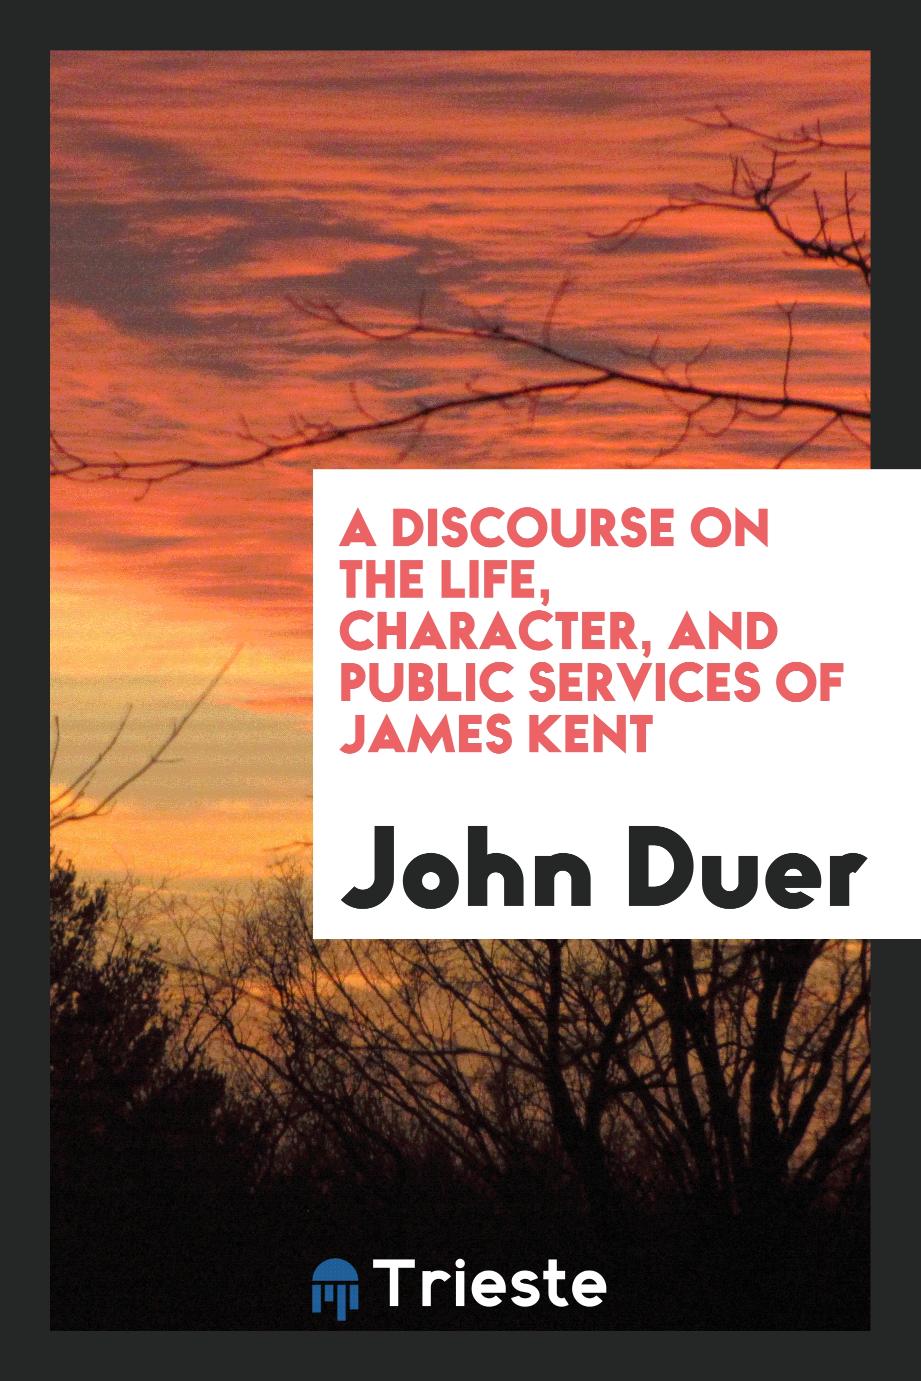 A Discourse on the Life, Character, and Public Services of James Kent